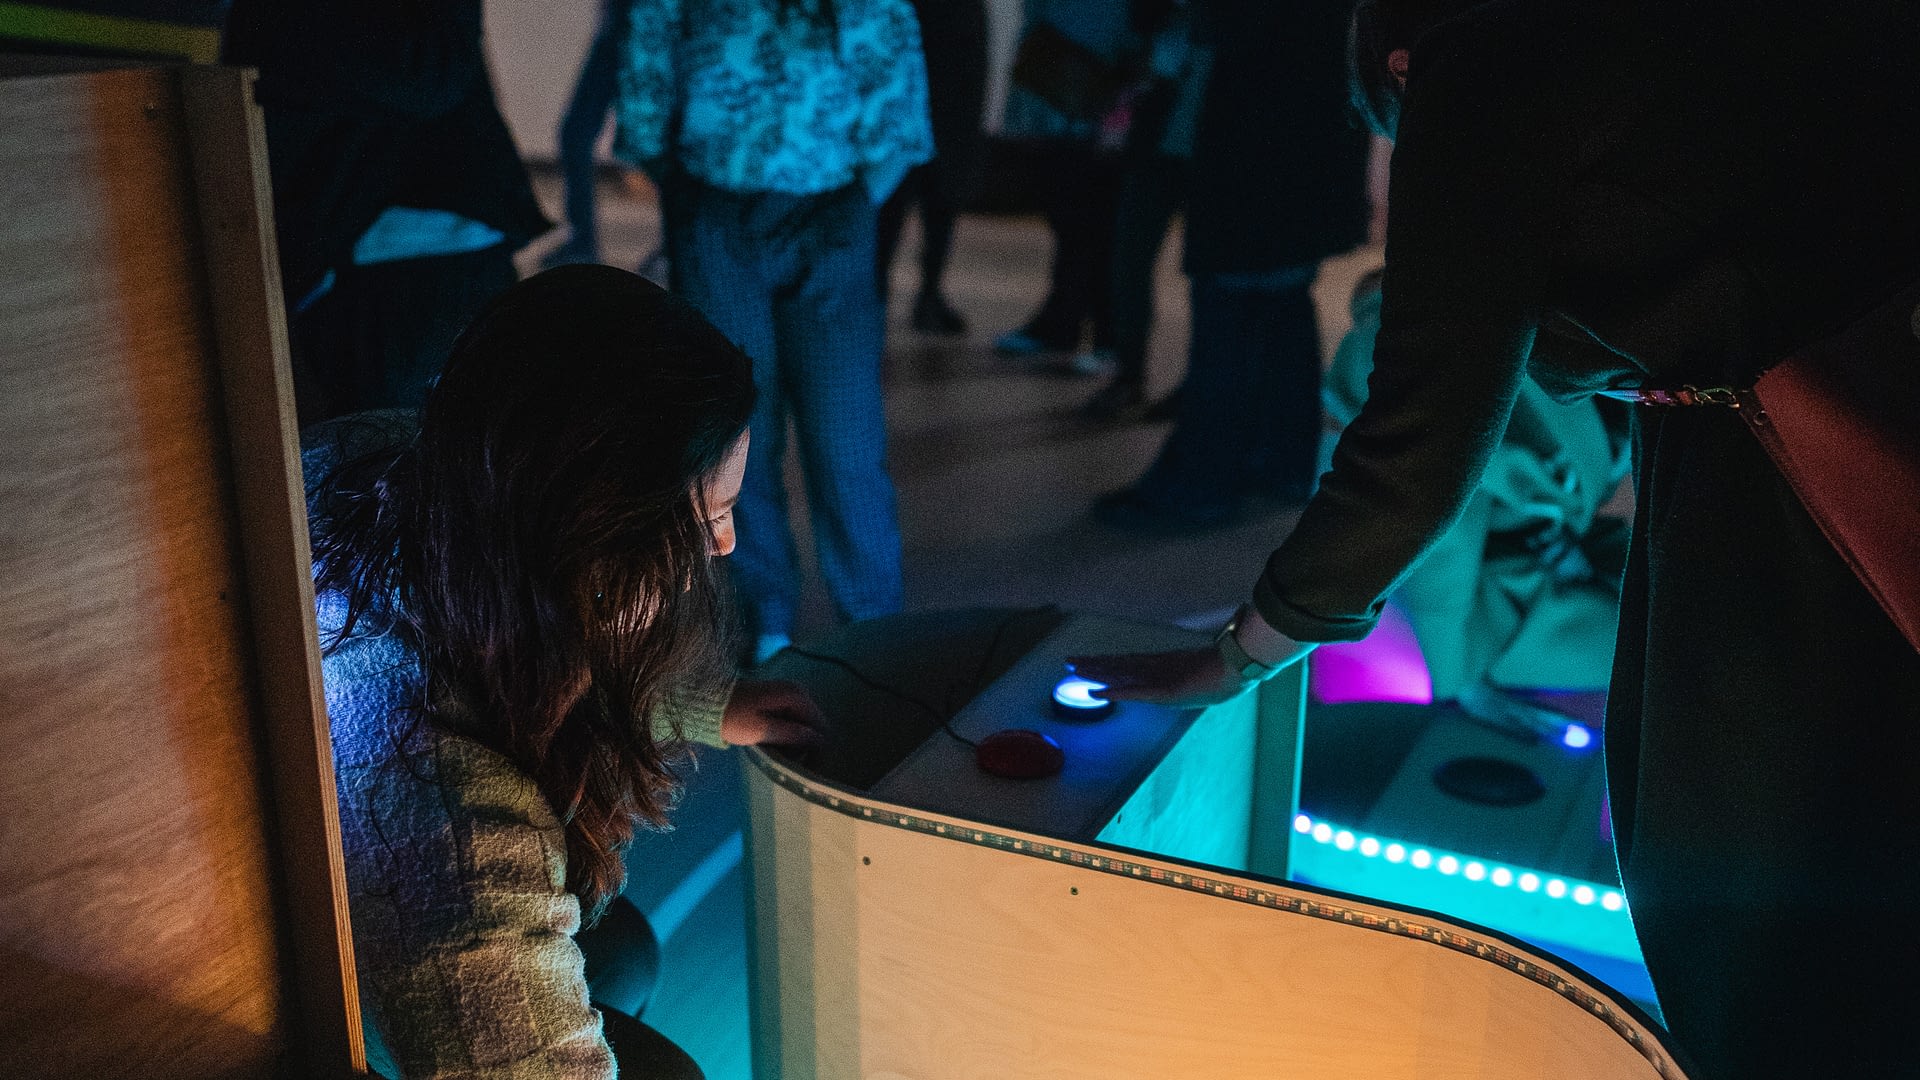 People play with buttons on a structure with LED lights that is shaped in the form of a sine wave